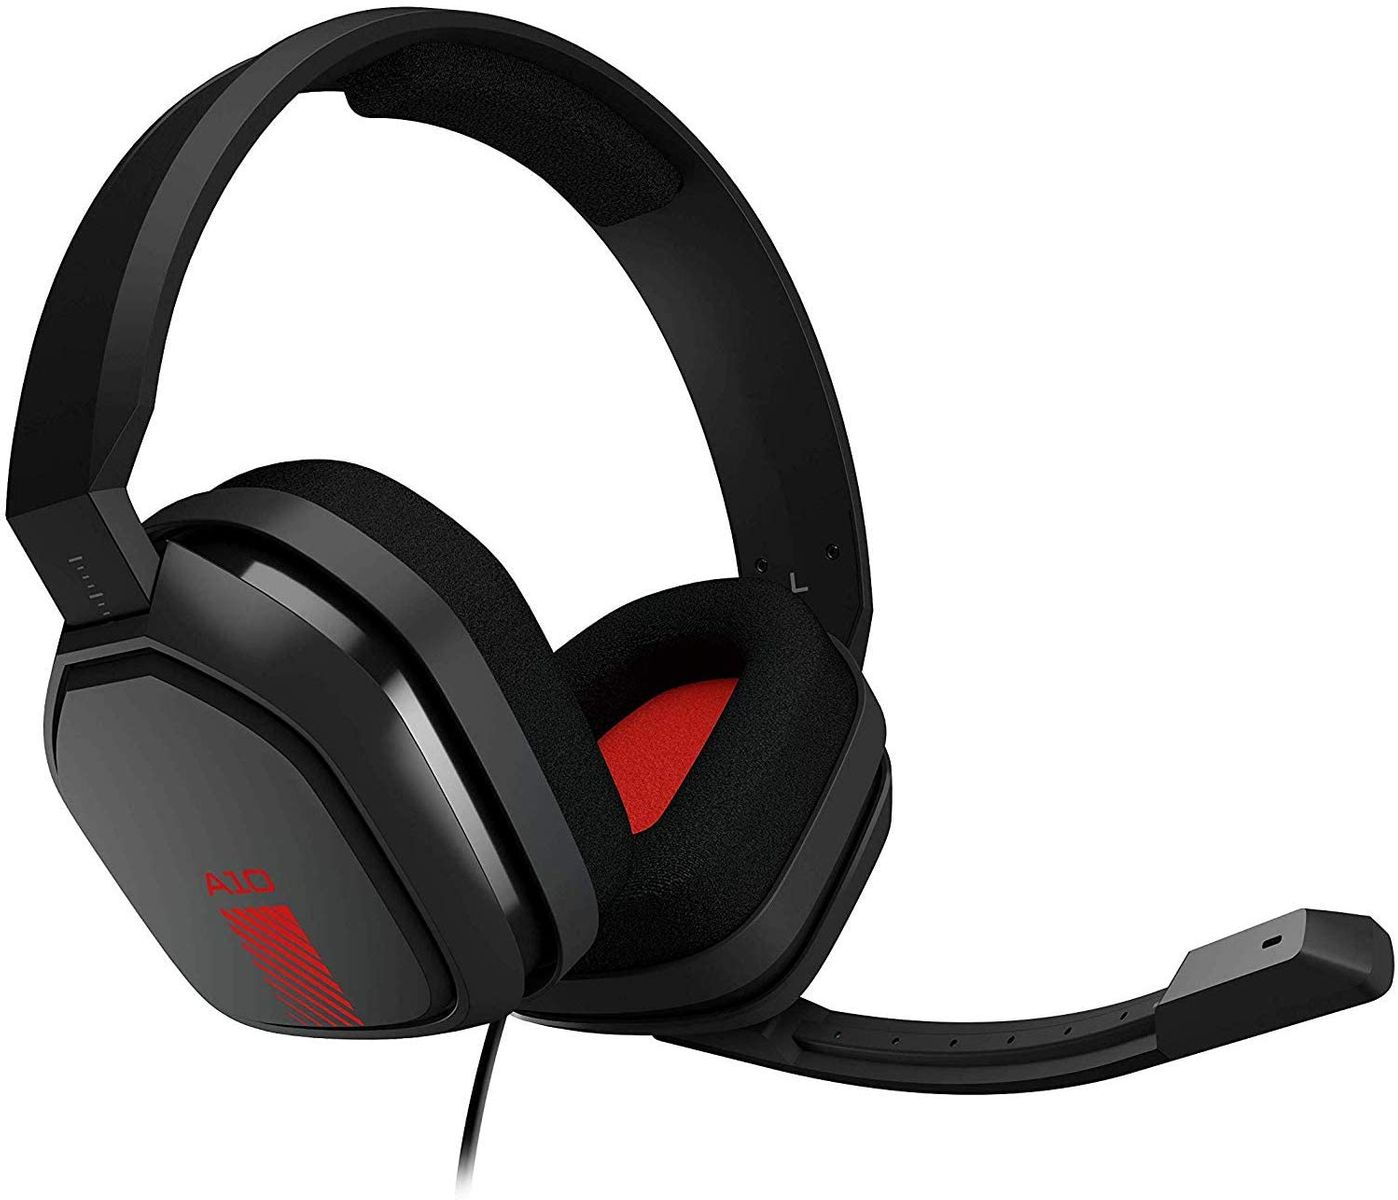 Astro Gaming A10 Headphones Headband Grey, Red 3.5mm connector